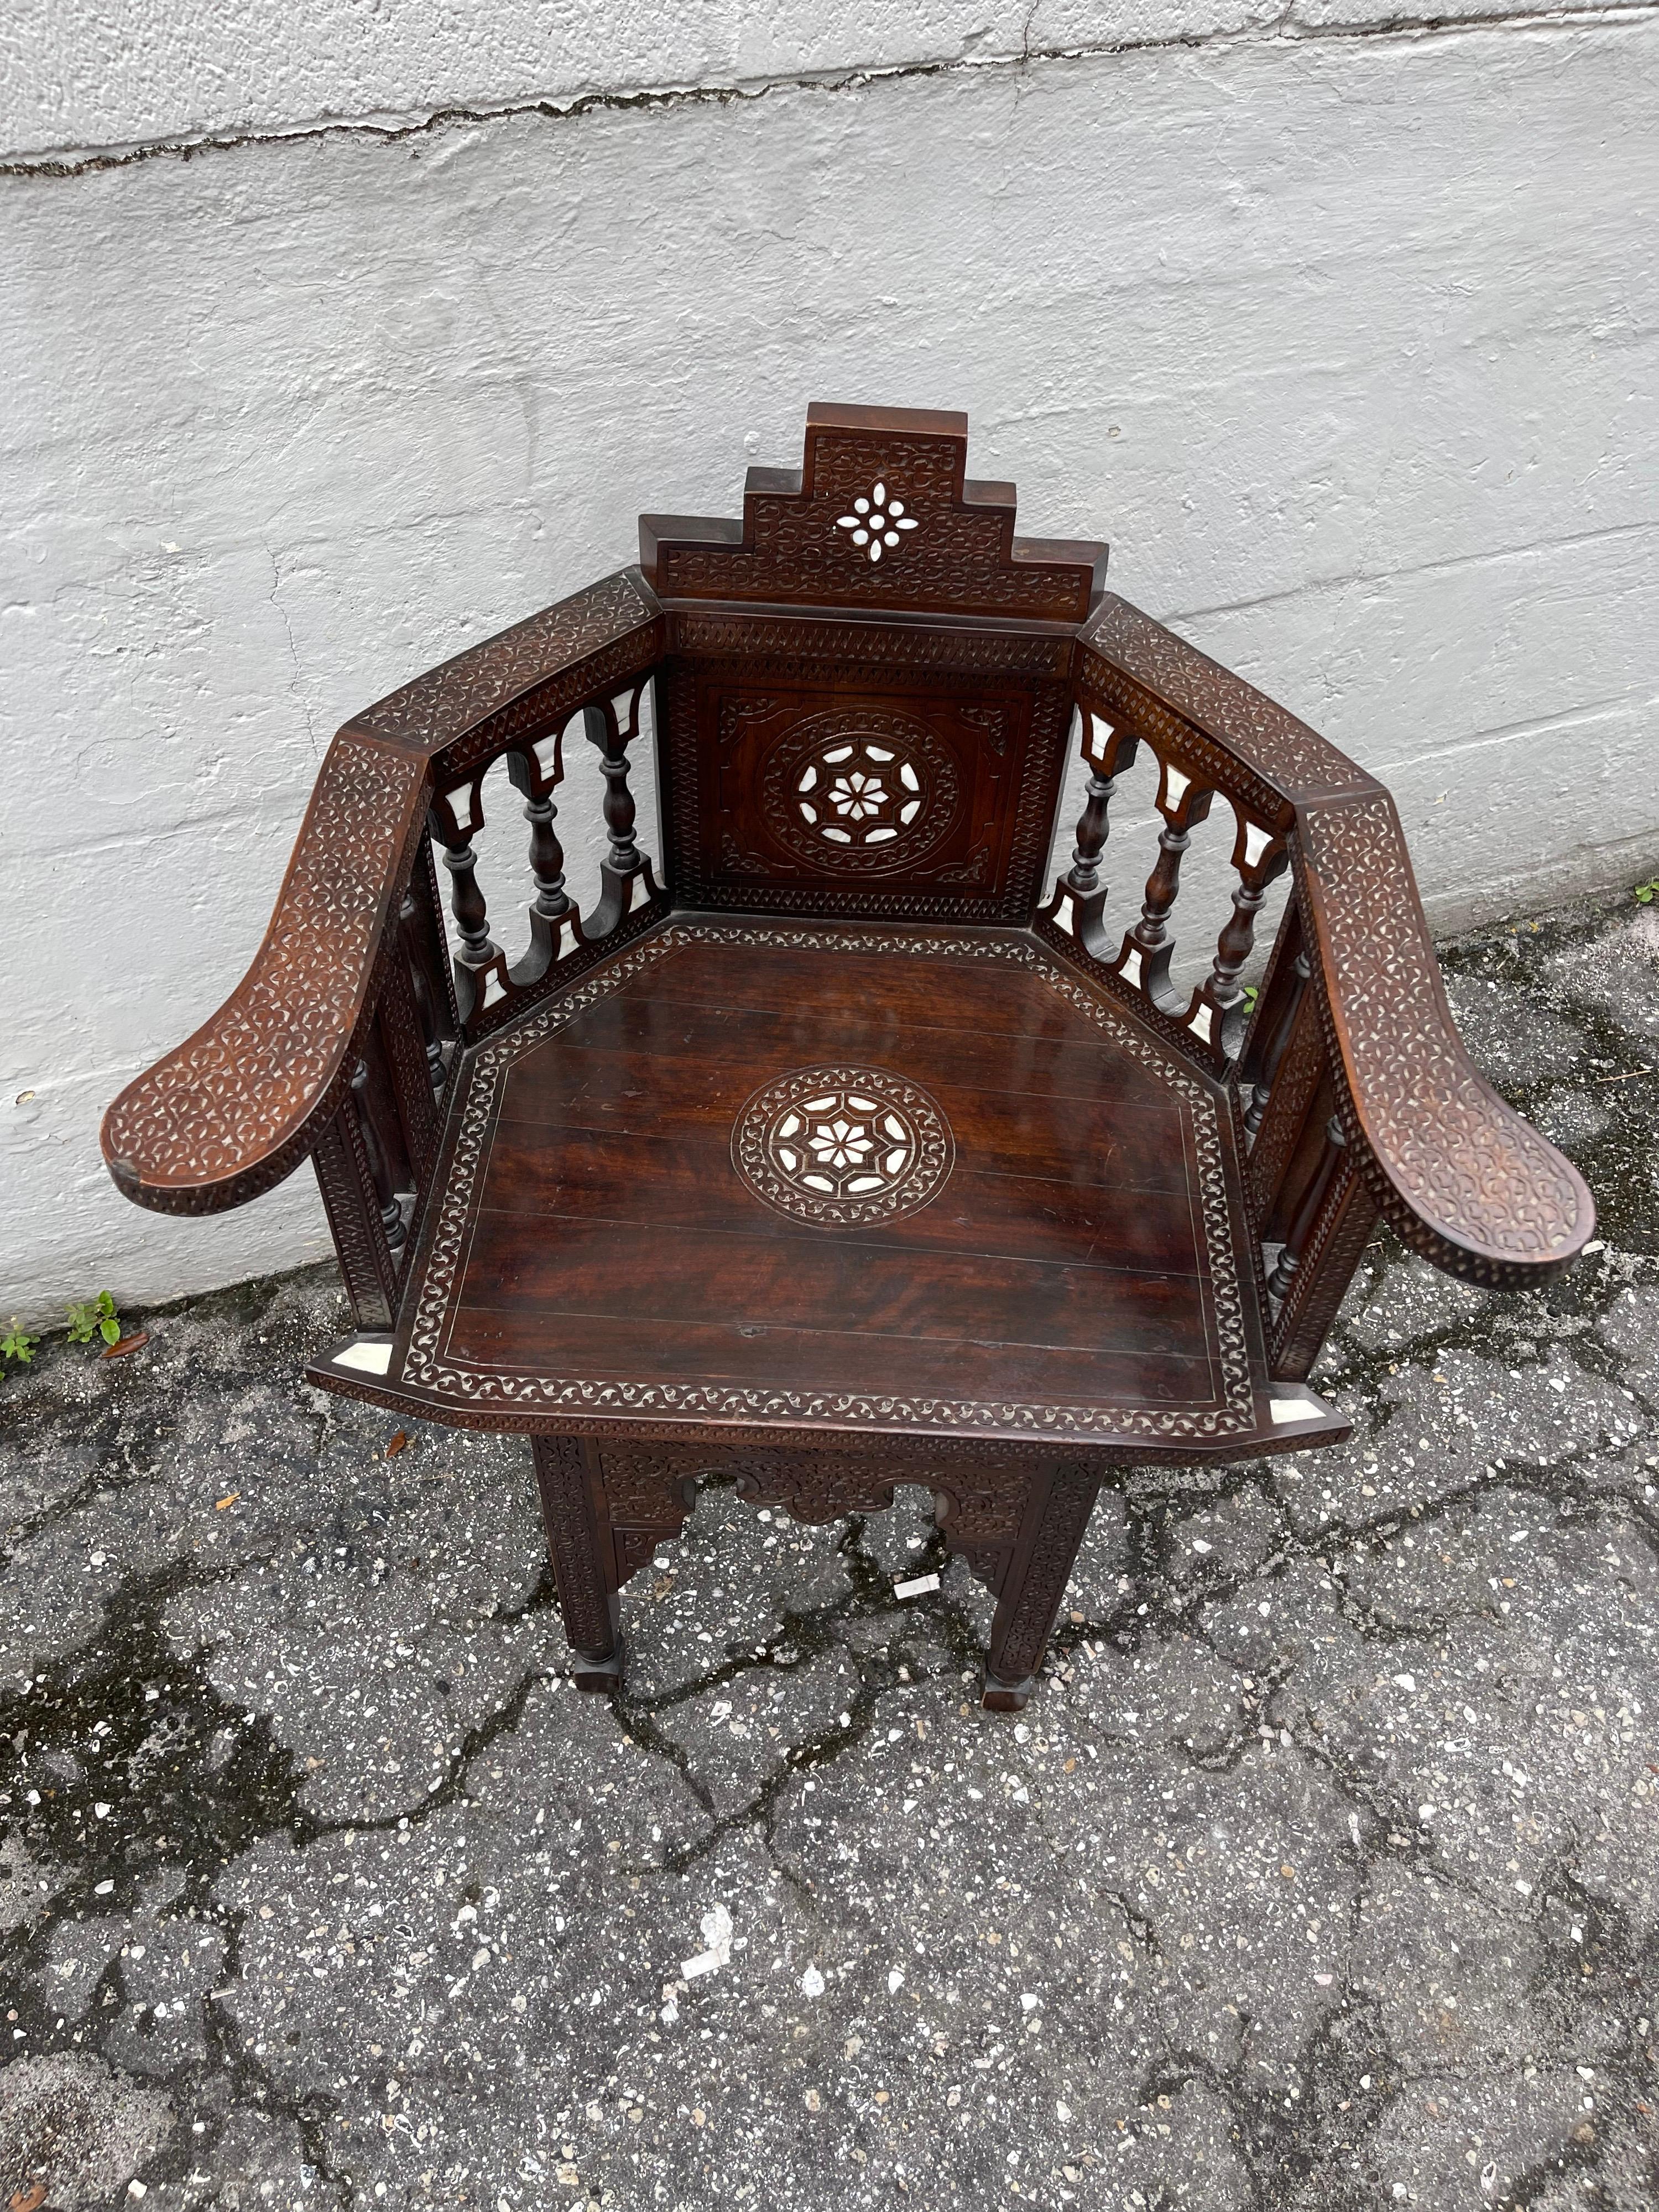 Unknown Middle Eastern Mother of Pearl Inlaid Armchair For Sale